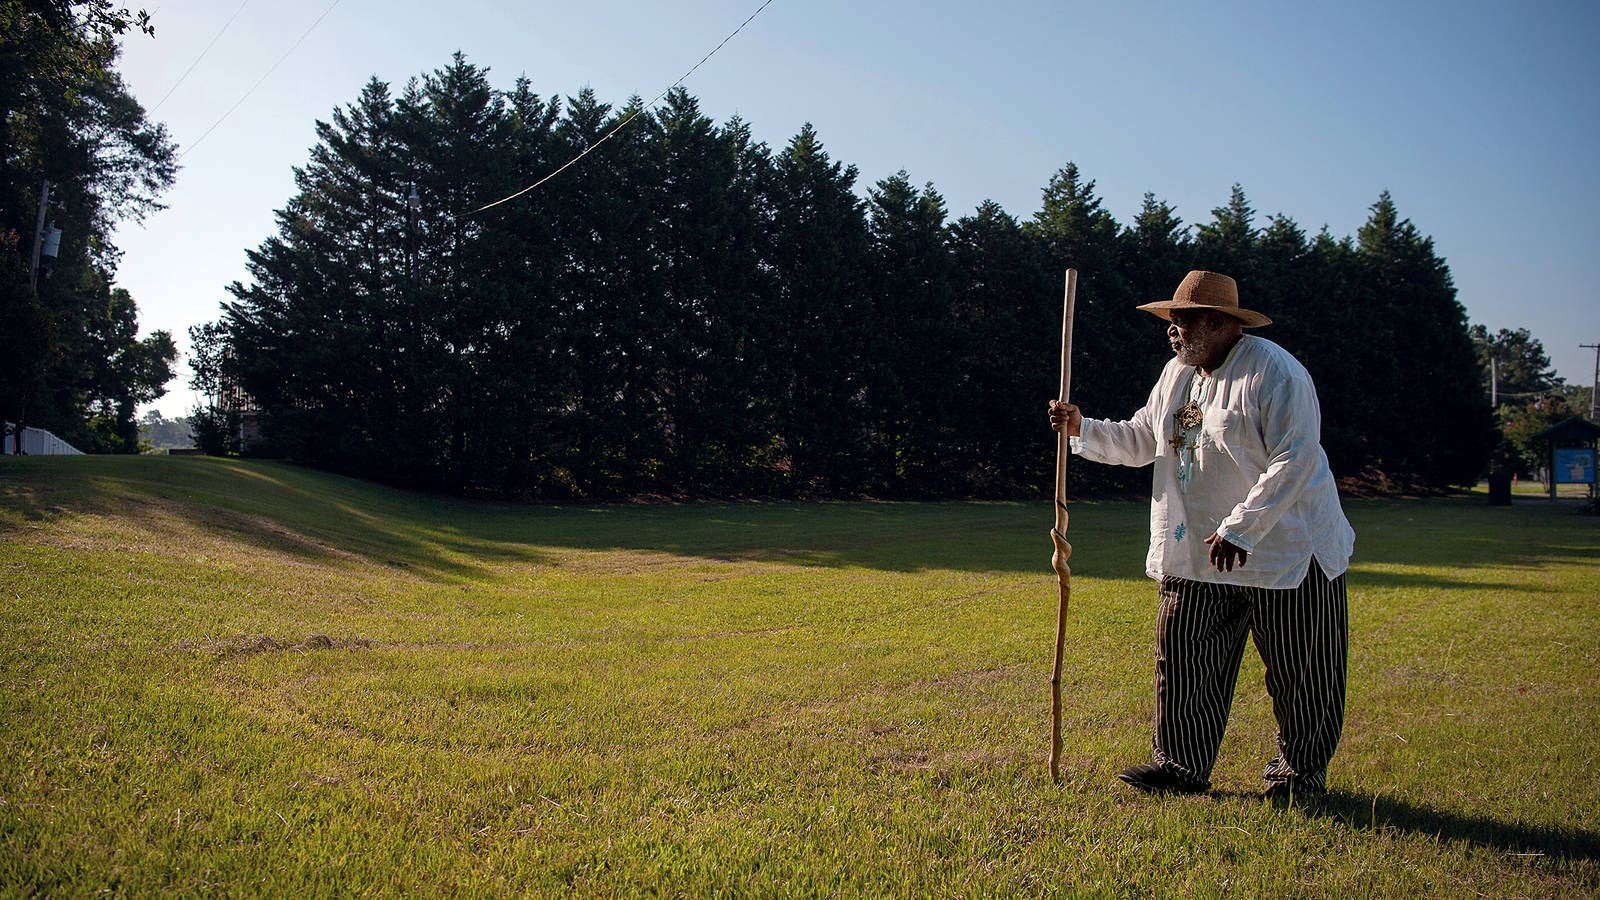 <p>Longtime advocate Ser Seshsh Ab Heter-C.M. Boxley walks across Forks of the Road in Natchez, Mississippi. Owing in part to Ser Boxley’s persistence, the landmark was recently added to Natchez National Historical Park.</p>